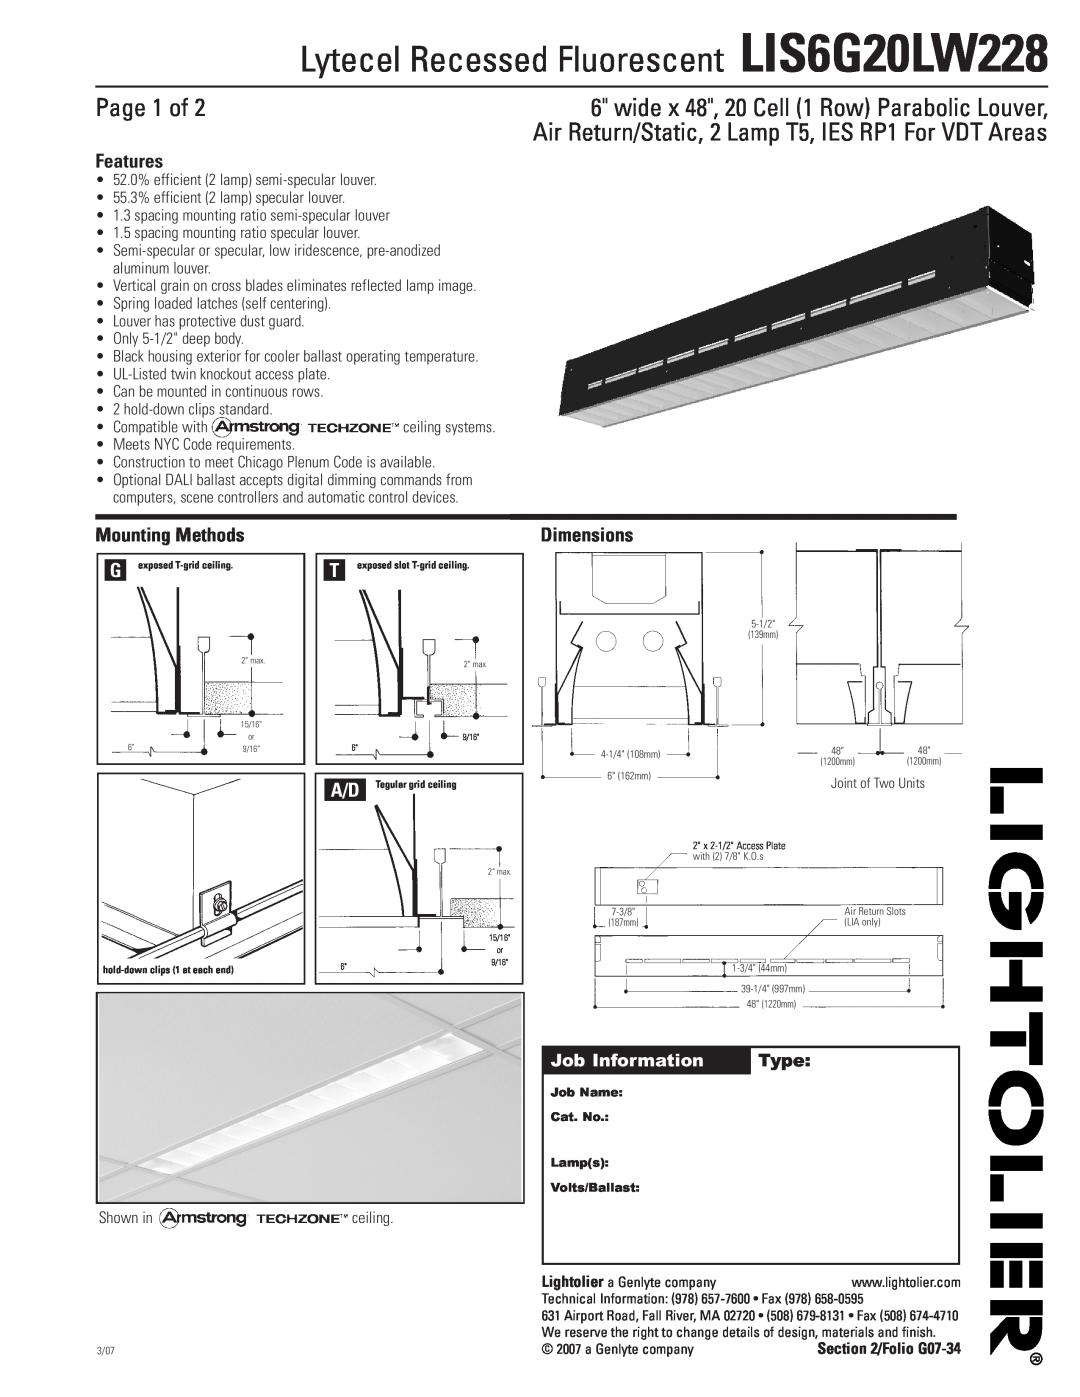 Lightolier dimensions Lytecel Recessed Fluorescent LIS6G20LW228, Page 1 of, Features, Mounting Methods, Dimensions 